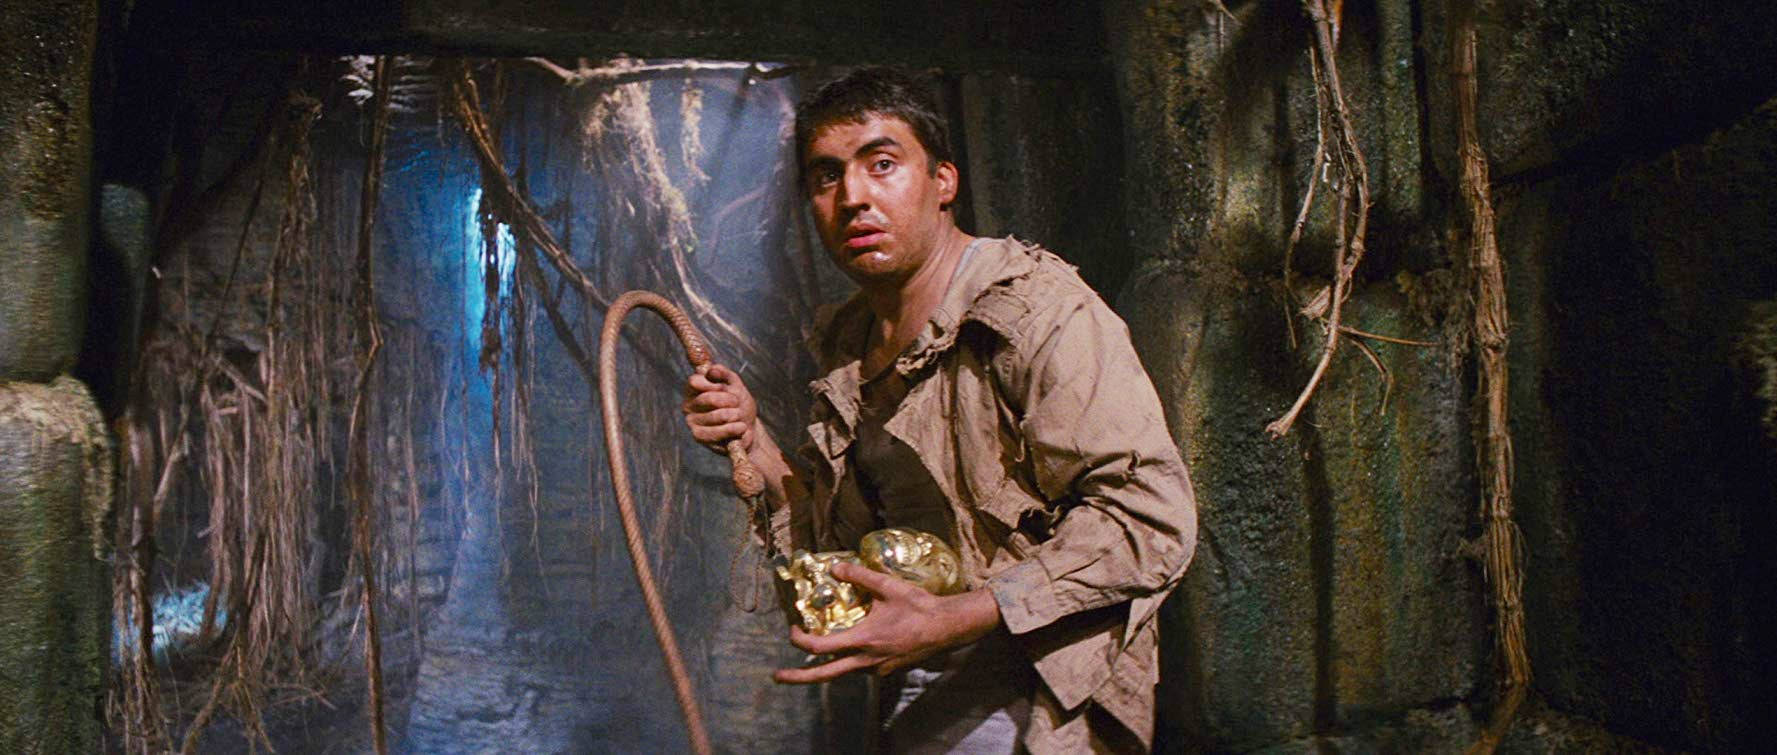 Alfred Molina Raiders Of The Lost Ark Wallpaper